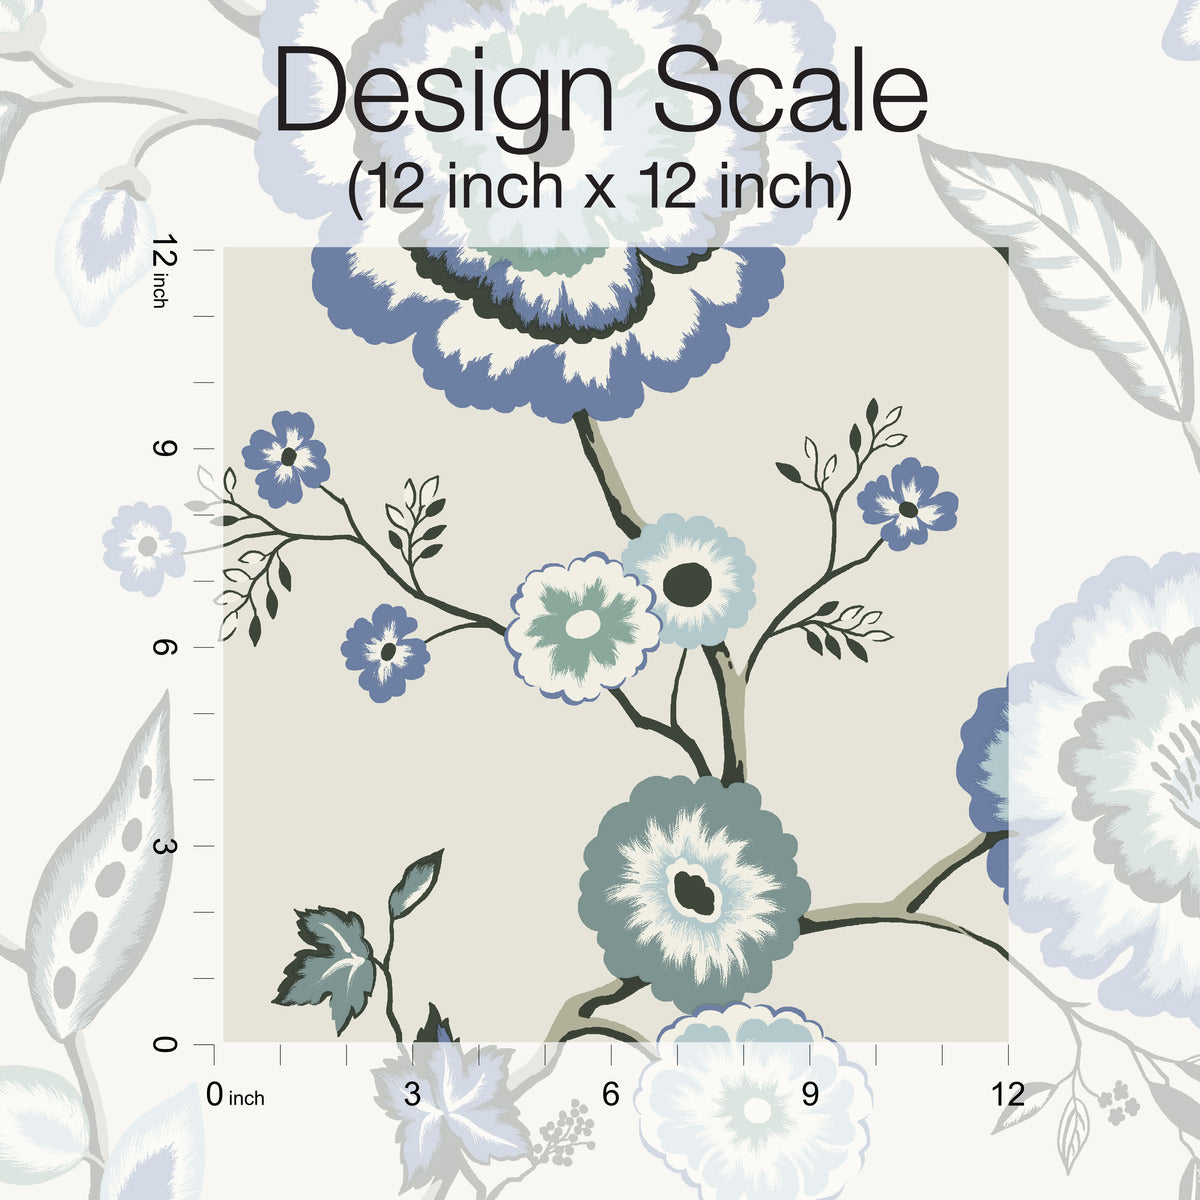 A floral pattern design featuring blue and white flowers with green leaves and stems against a light background. A 12 inch by 12 inch scale is displayed in the center, illustrating the proportion of this Dahlia Blooms Midnight/Multi Wallpaper Black, Pink (60 Sq.Ft.) by York Wallcoverings compared to the scale. Enjoy botanical elegance with easy installation and removal.